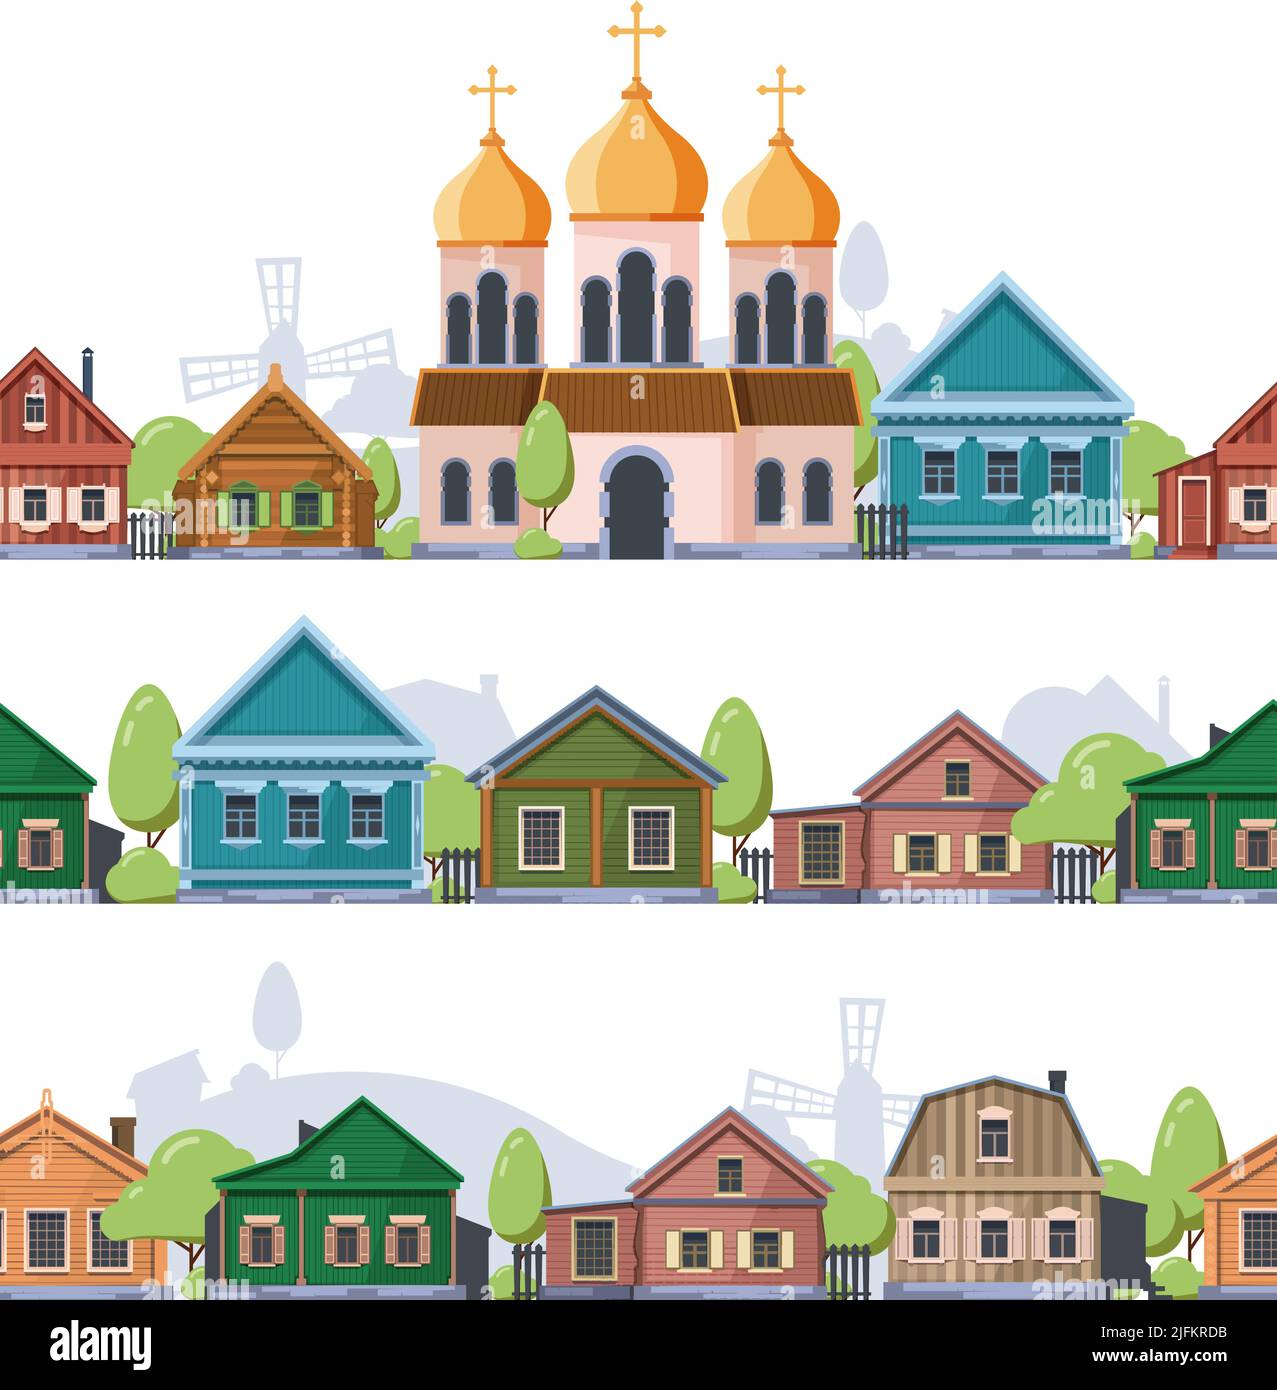 Russian village landscape. Rural old style wooden houses garish vector seamless background template Stock Vector